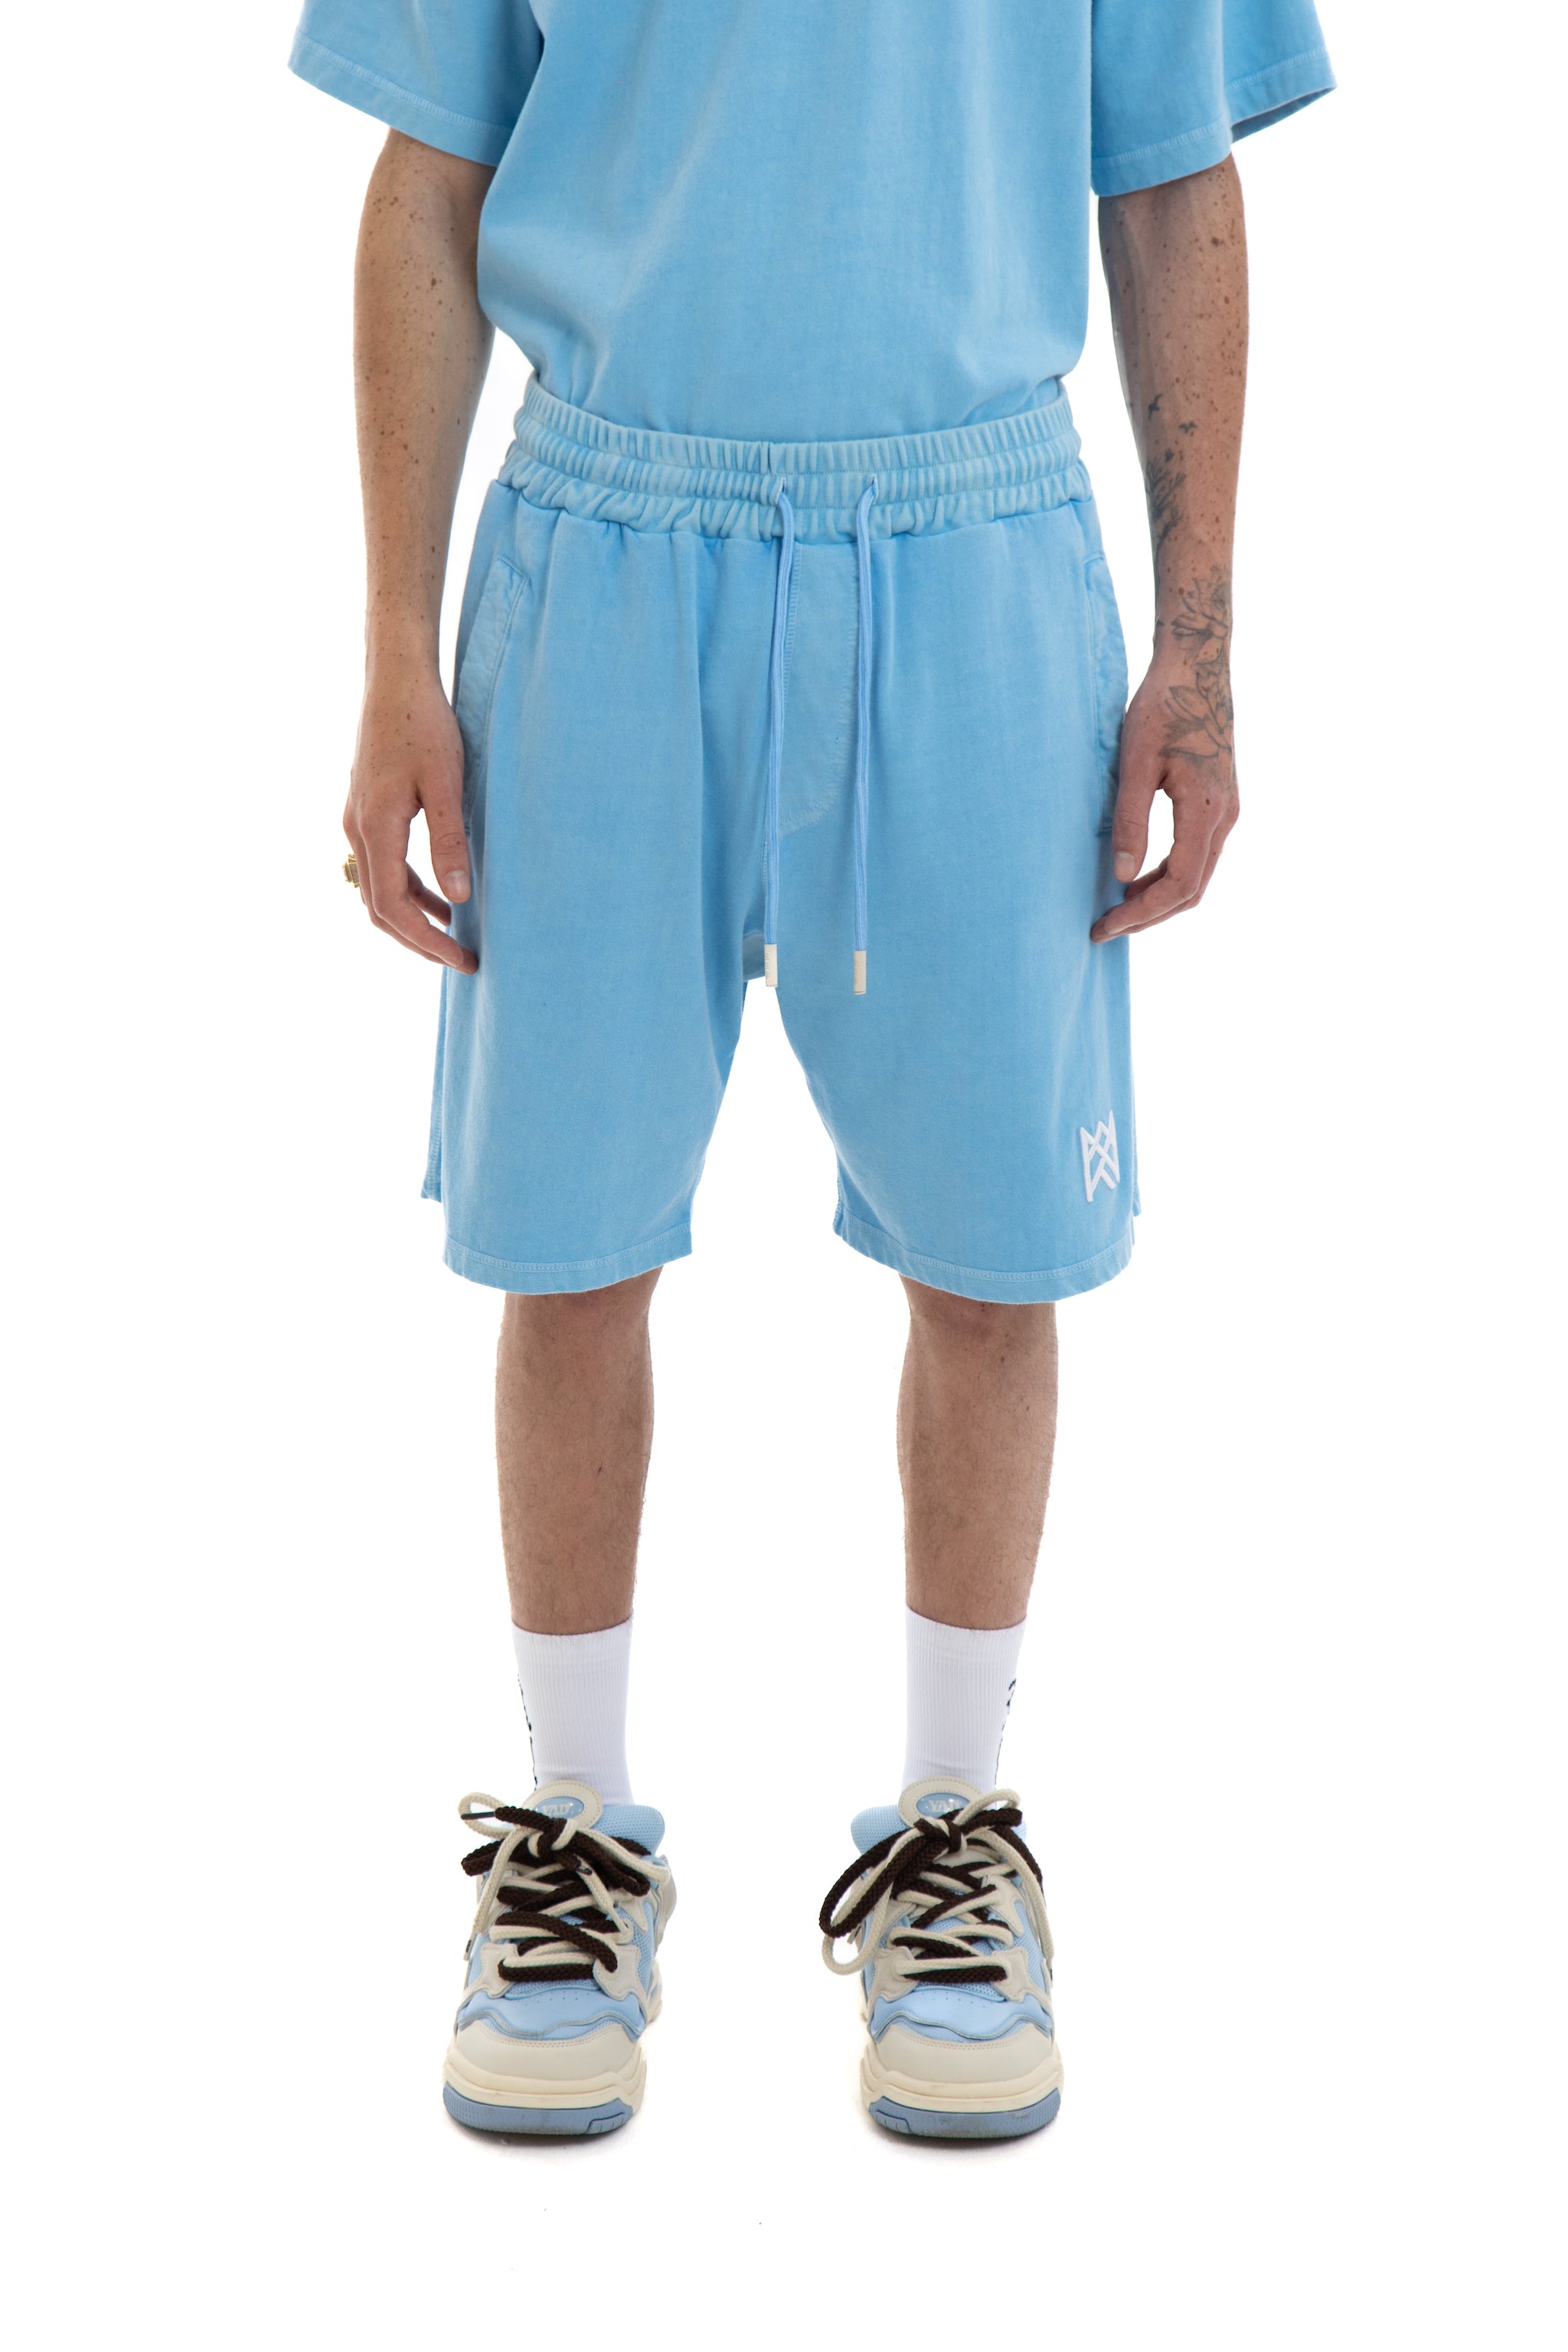 Heir Oversized Shorts Sky Blue - RealArtisticPeople